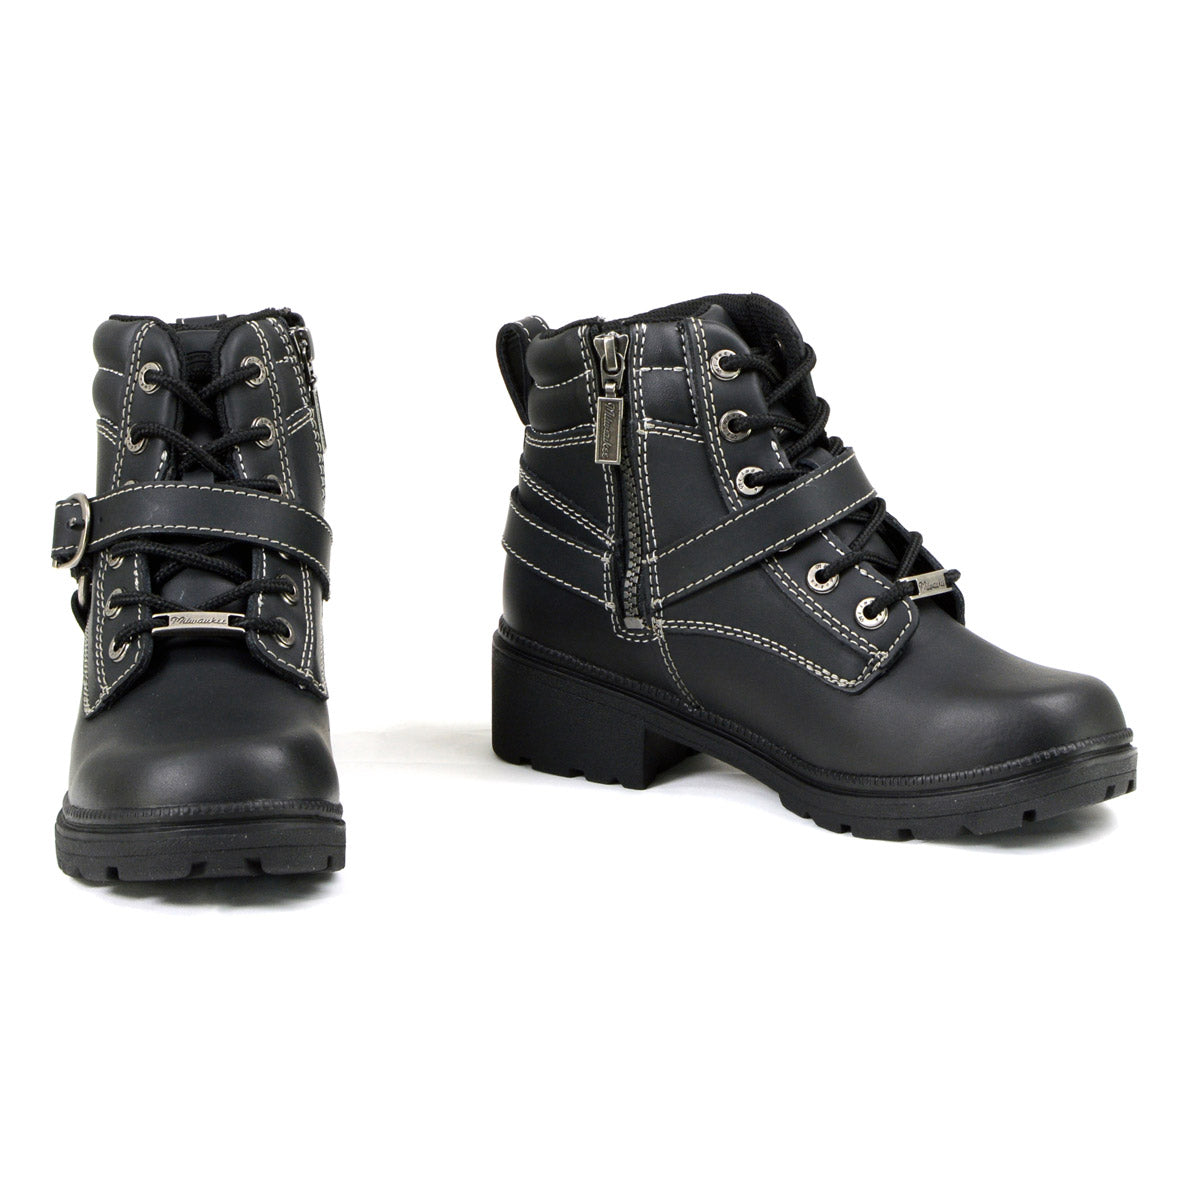 Milwaukee Motorcycle Clothing Company MB228 Paragon Leather Women's Black Motorcycle Boots